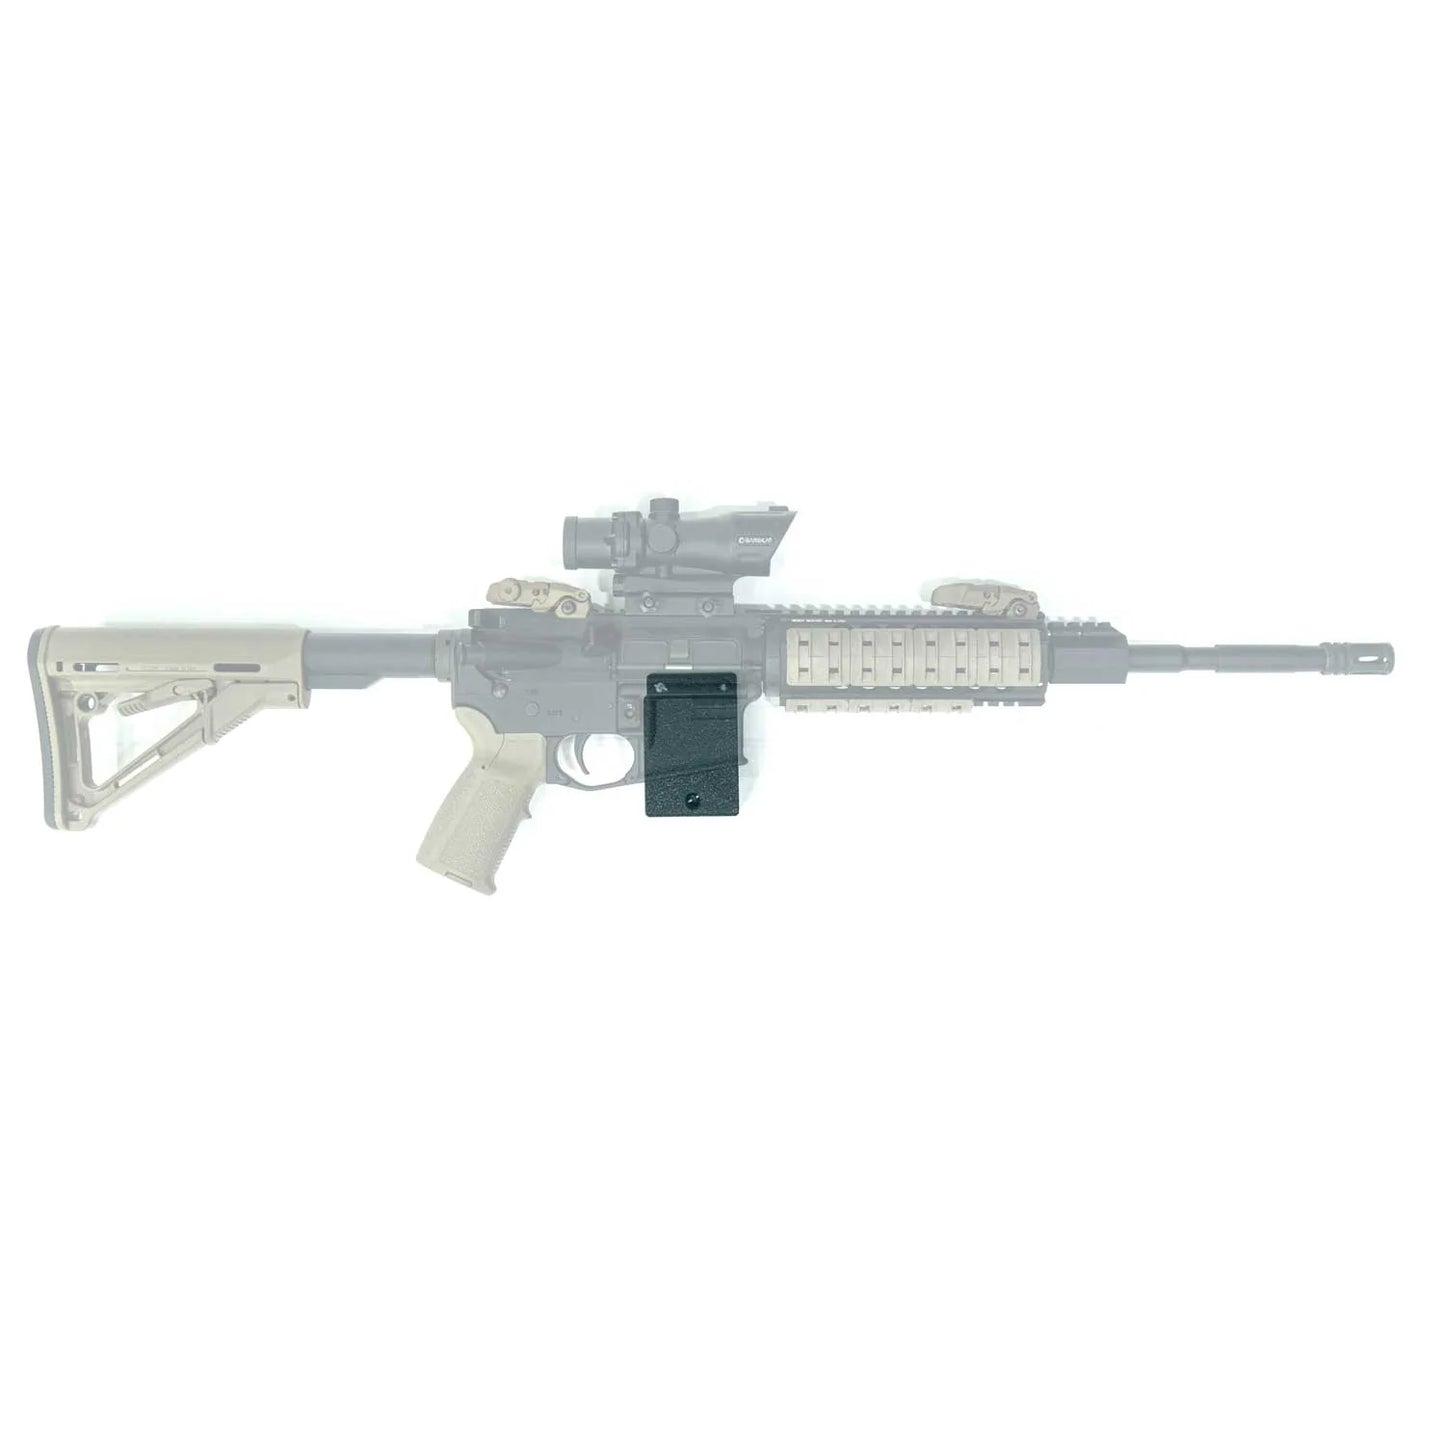 Devoid Magwell wall mount for AR15's